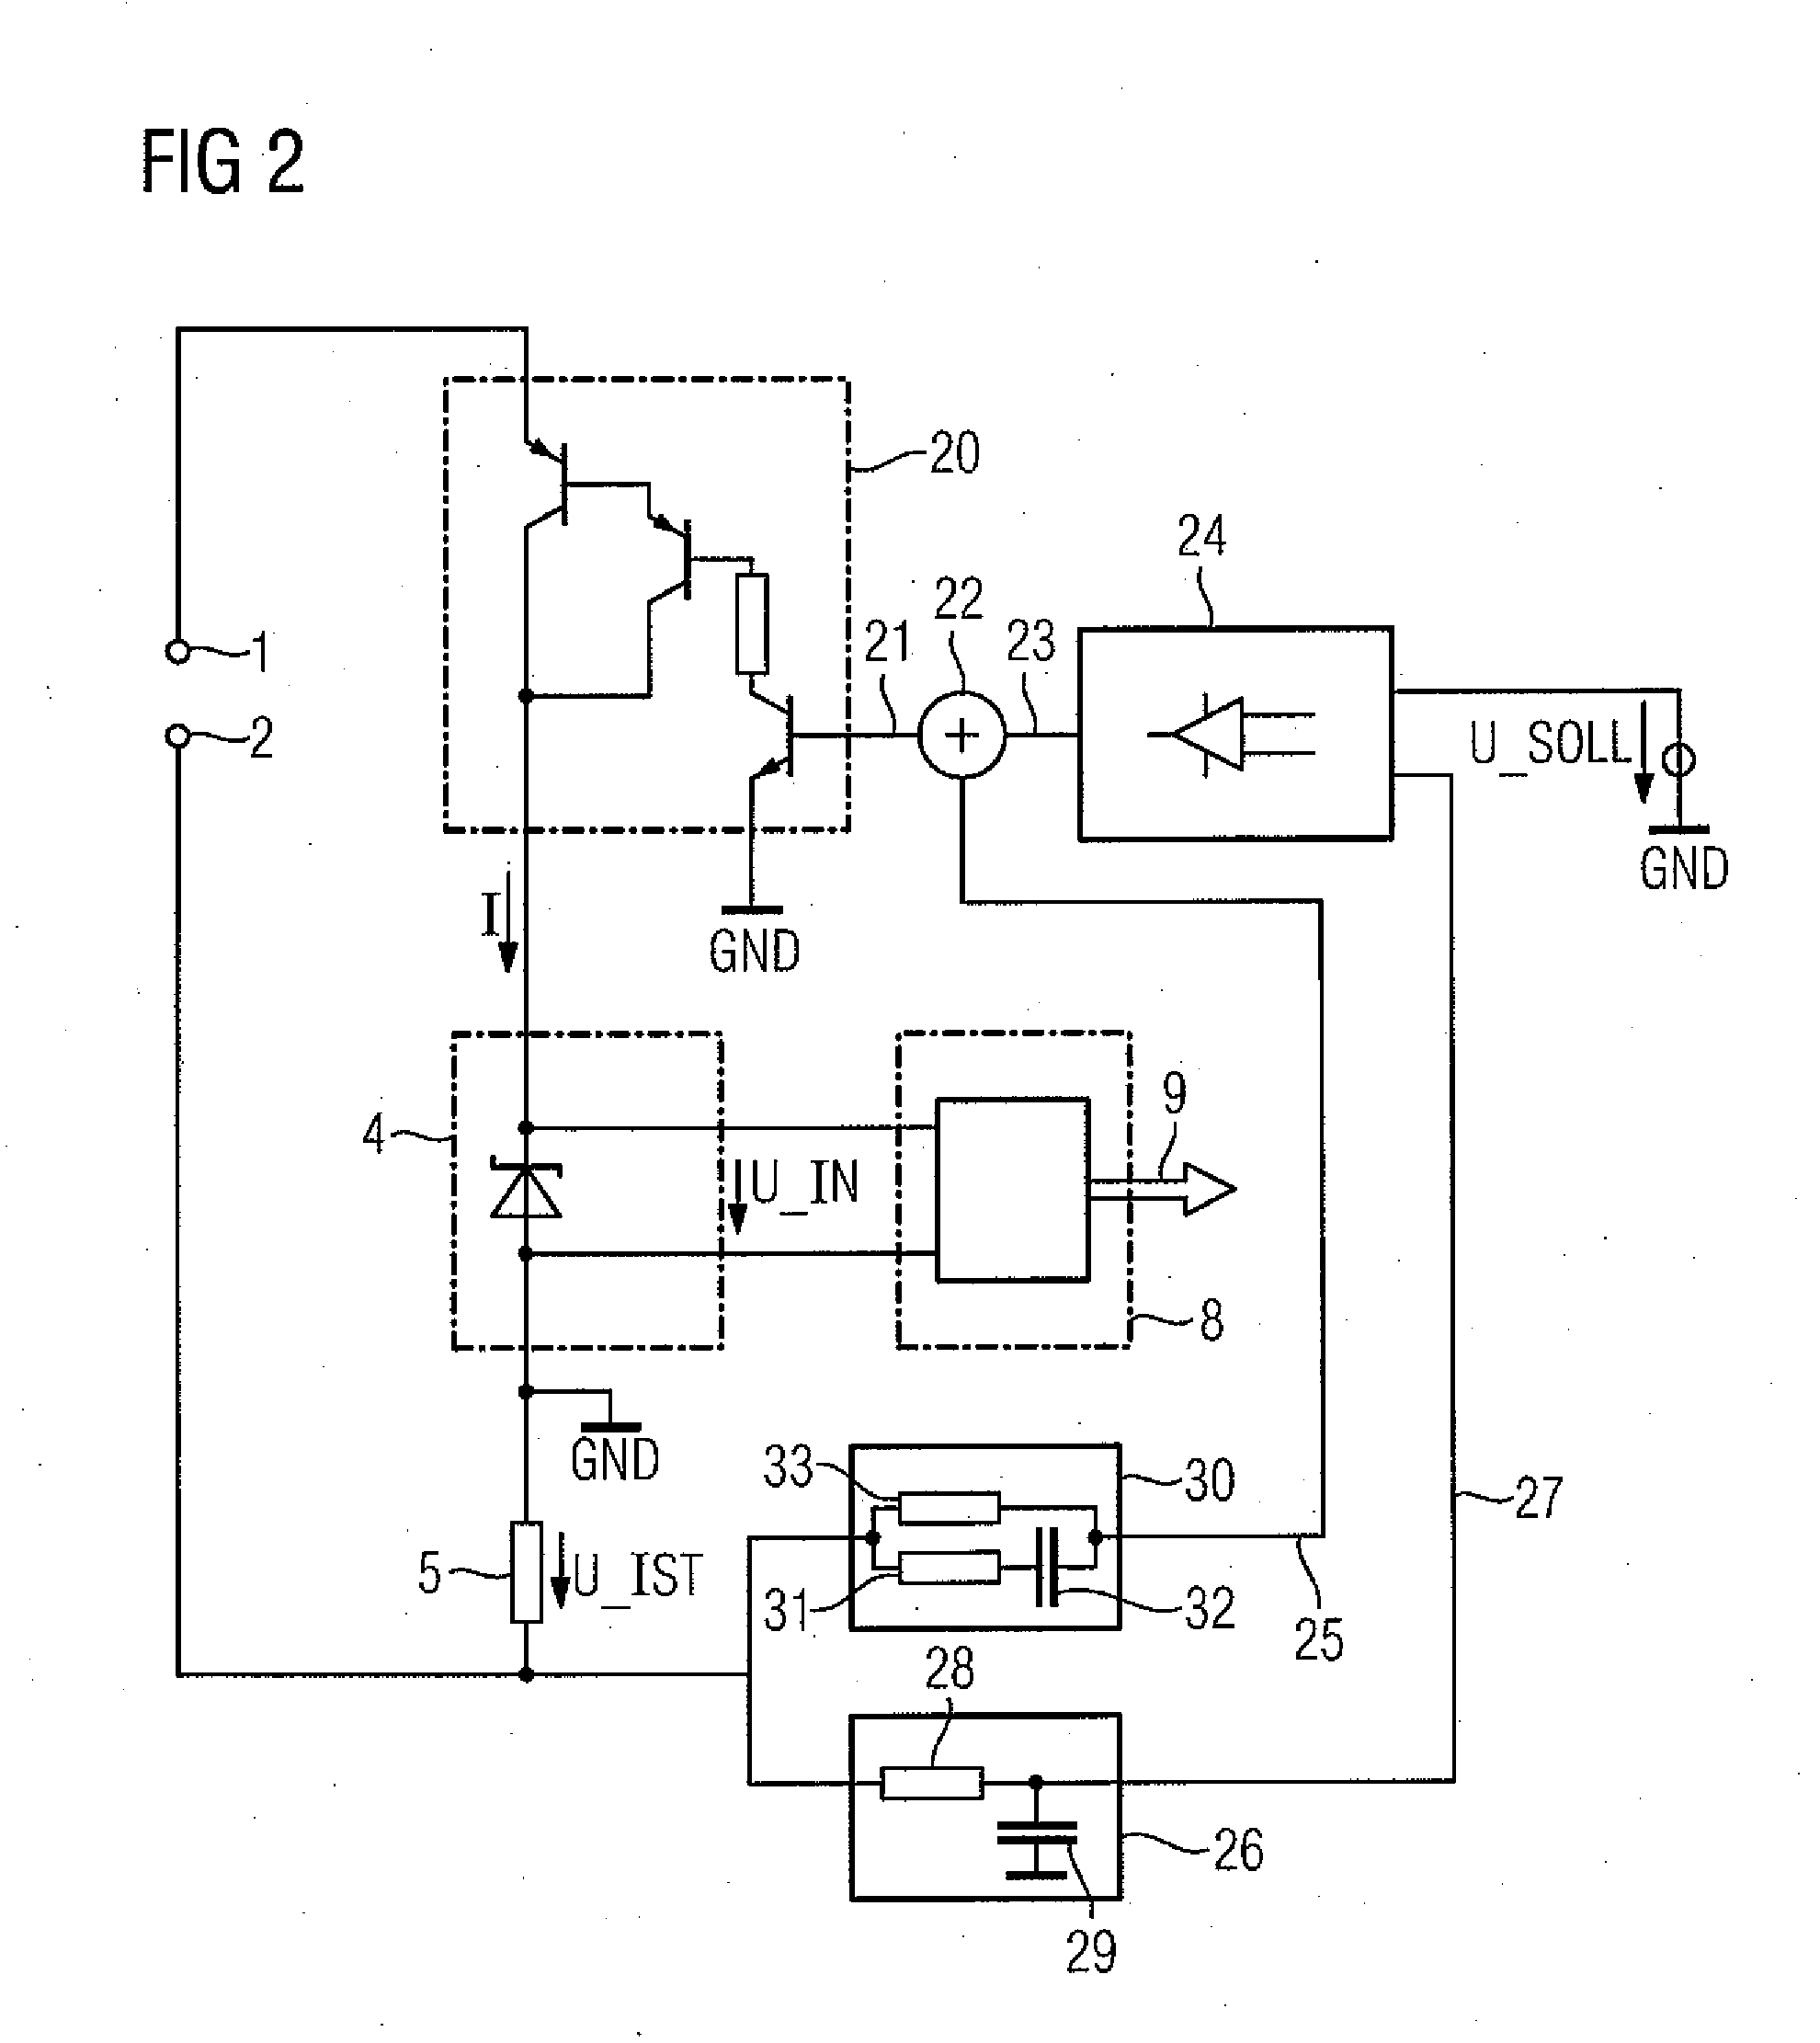 Field Device for Process Instrumentation